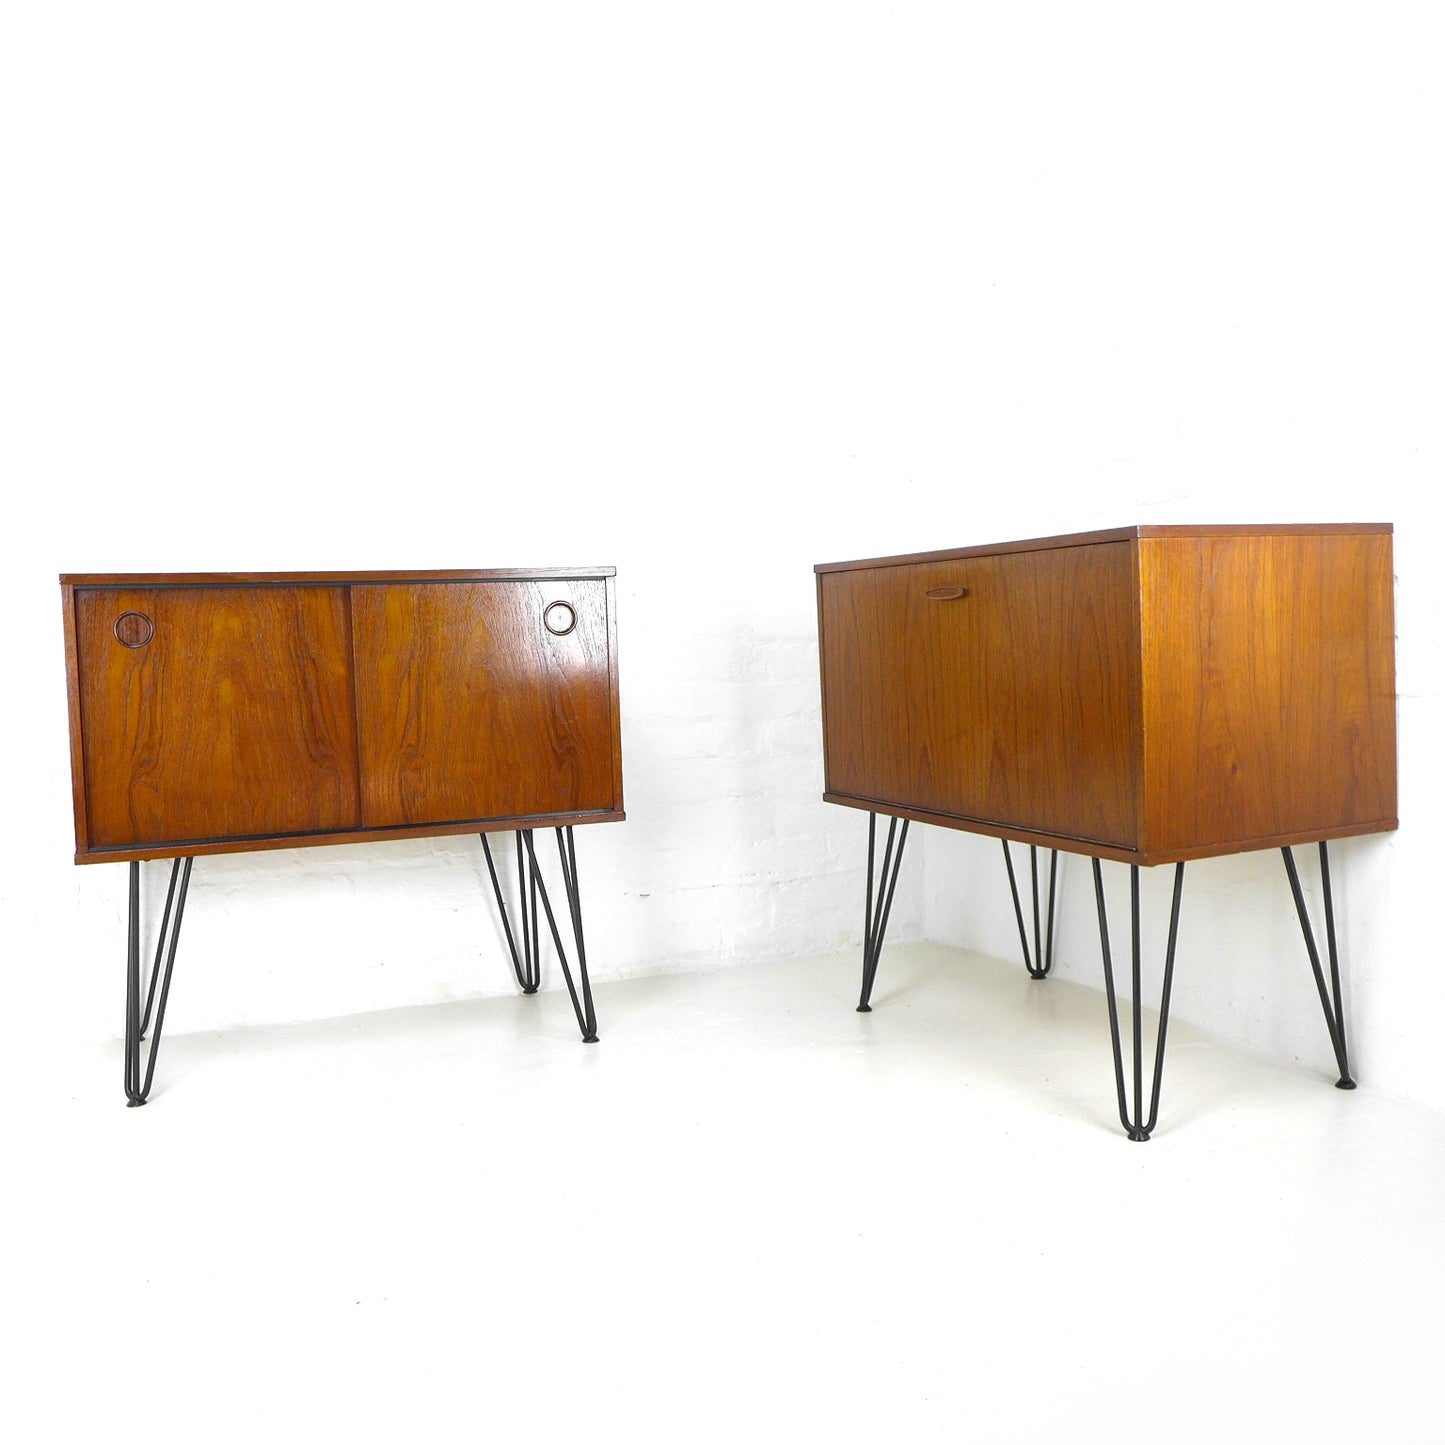 Pair of Mid Century Teak Record/Drinks Cabinets / Modular Sideboard on Hairpin Legs by Avalon